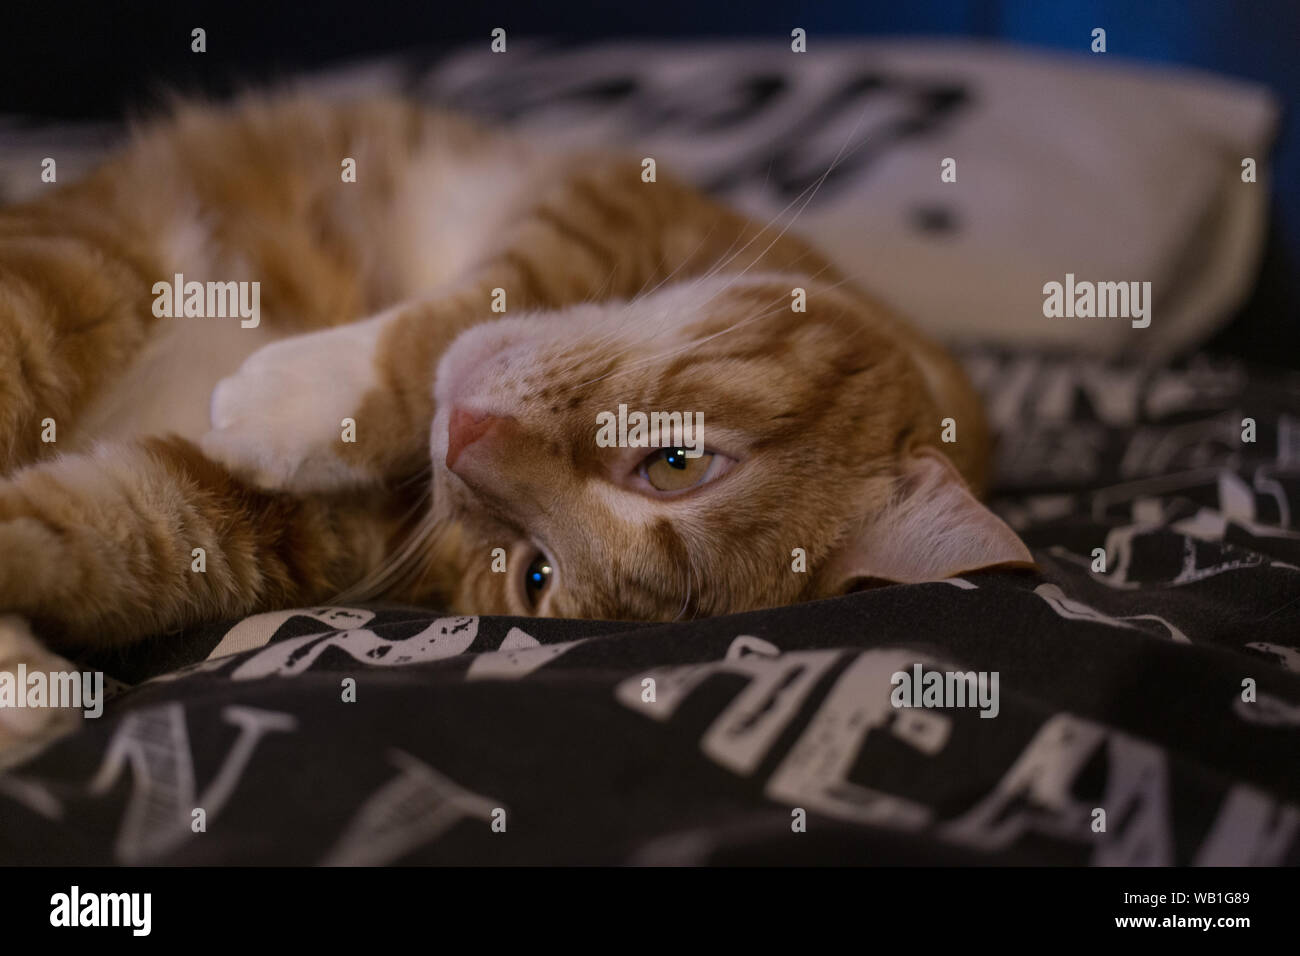 Cat laying in bed, cats cute, cat in bed, cat watching, cat staring, Michael Jackson cat, cat dancing, Stock Photo